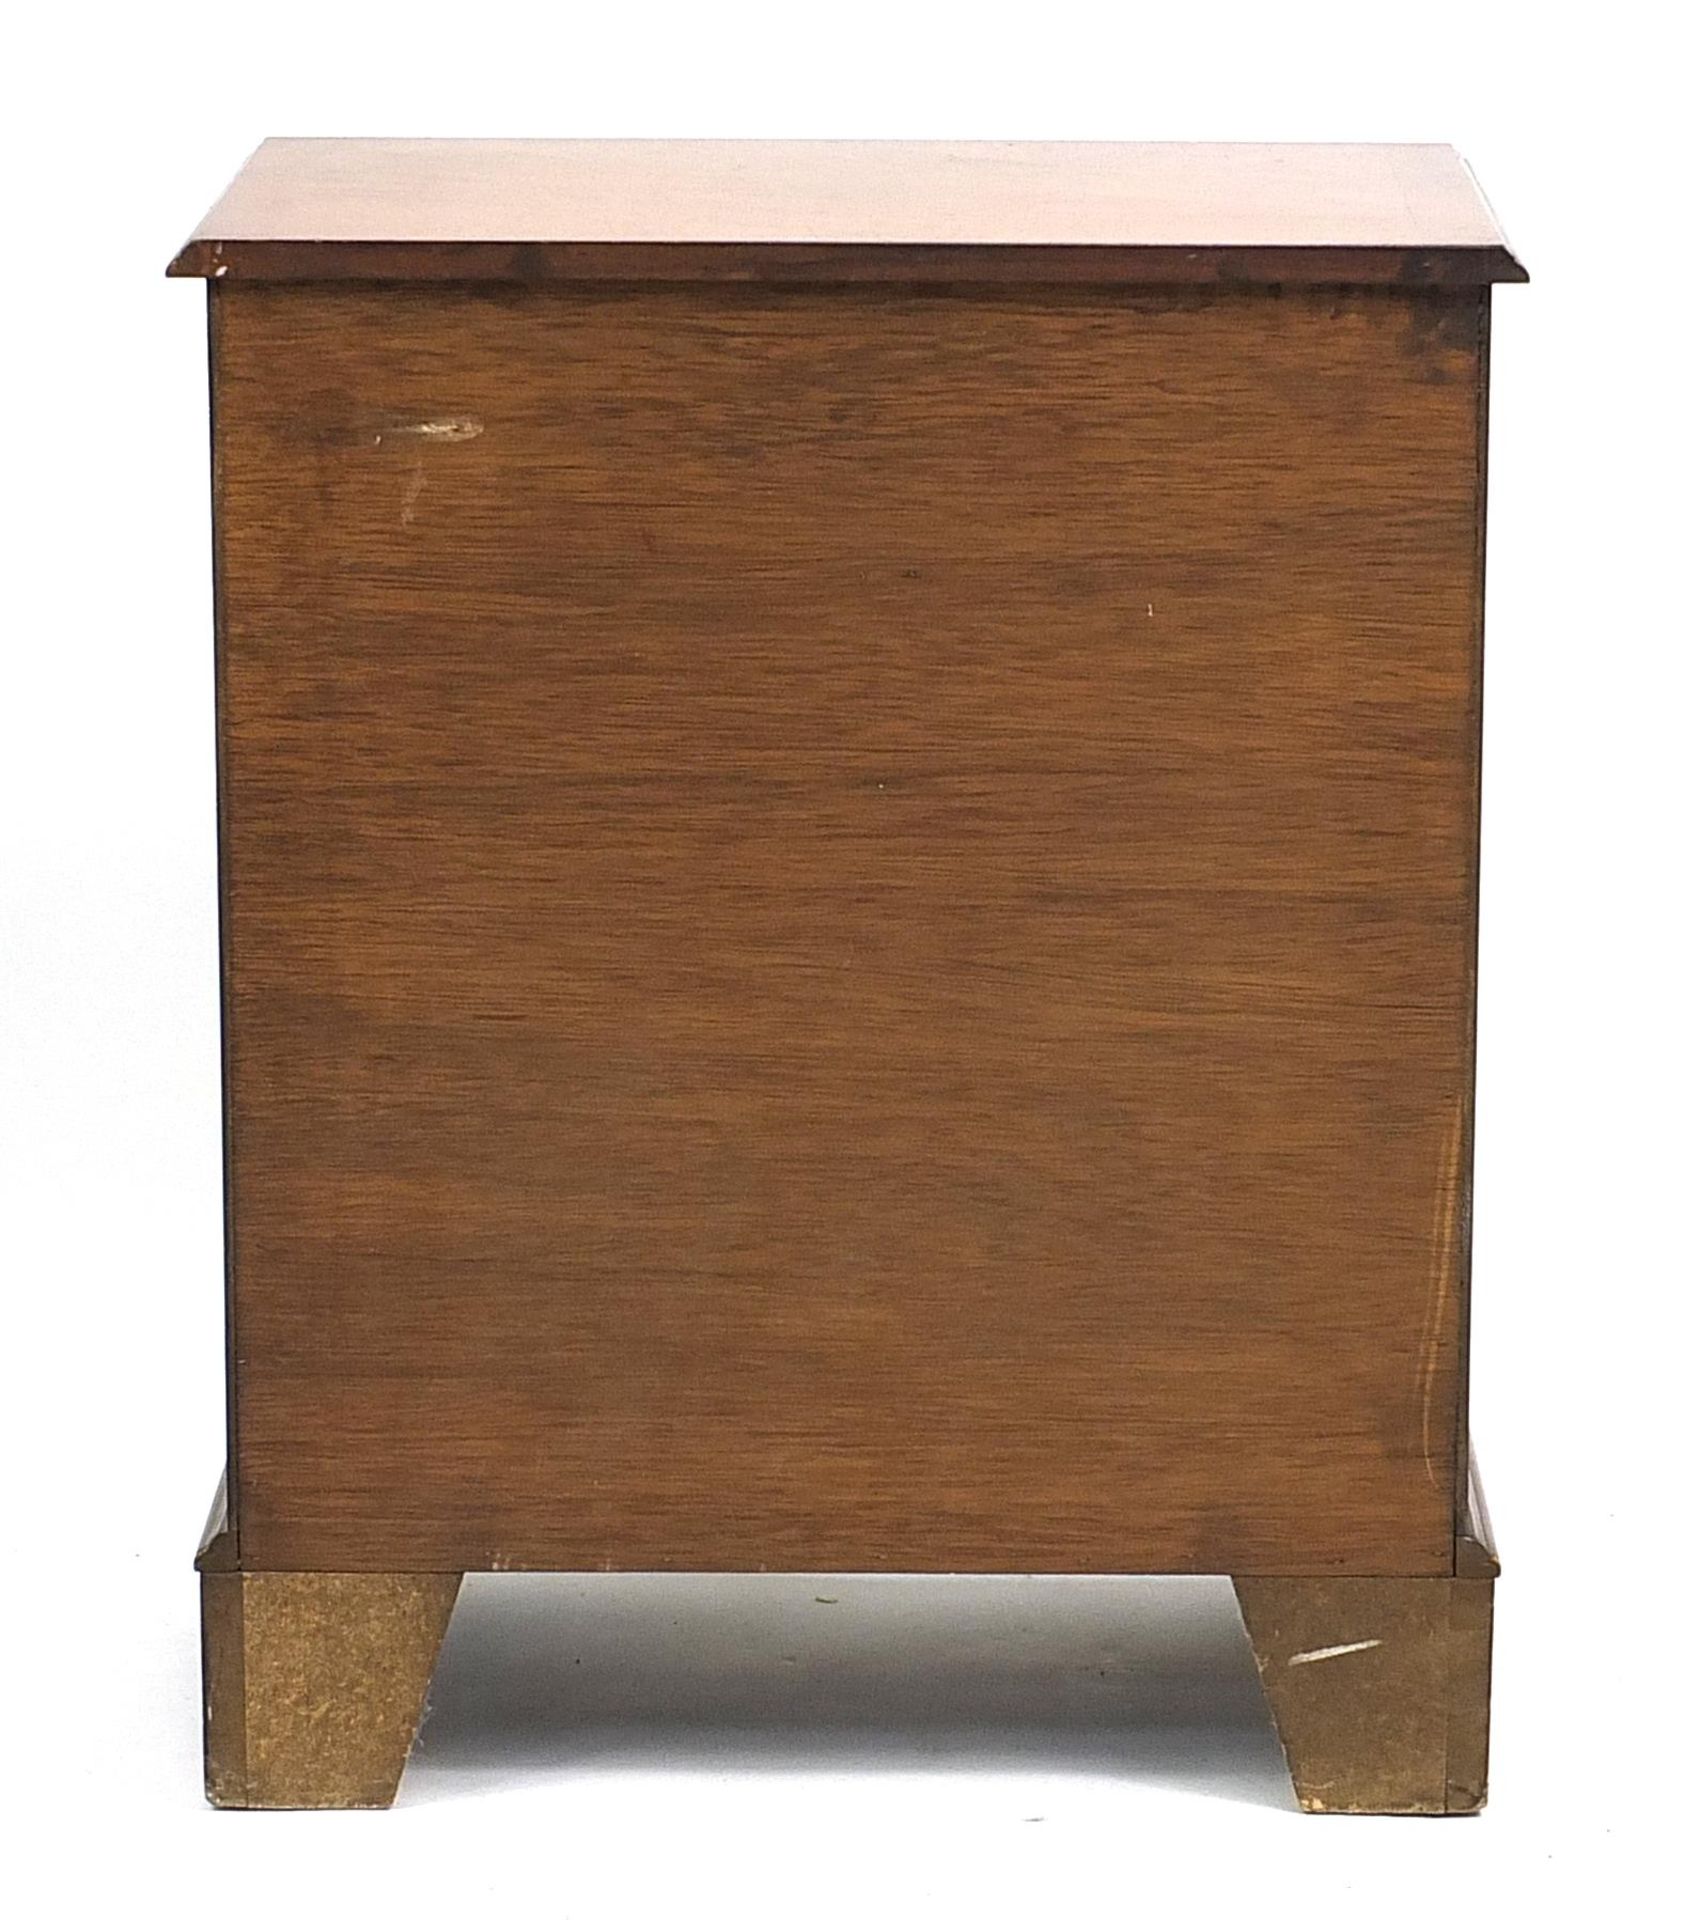 Cross banded walnut five drawer chest with bracket feet, 77cm H x 63cm W x 38cm D - Image 3 of 3